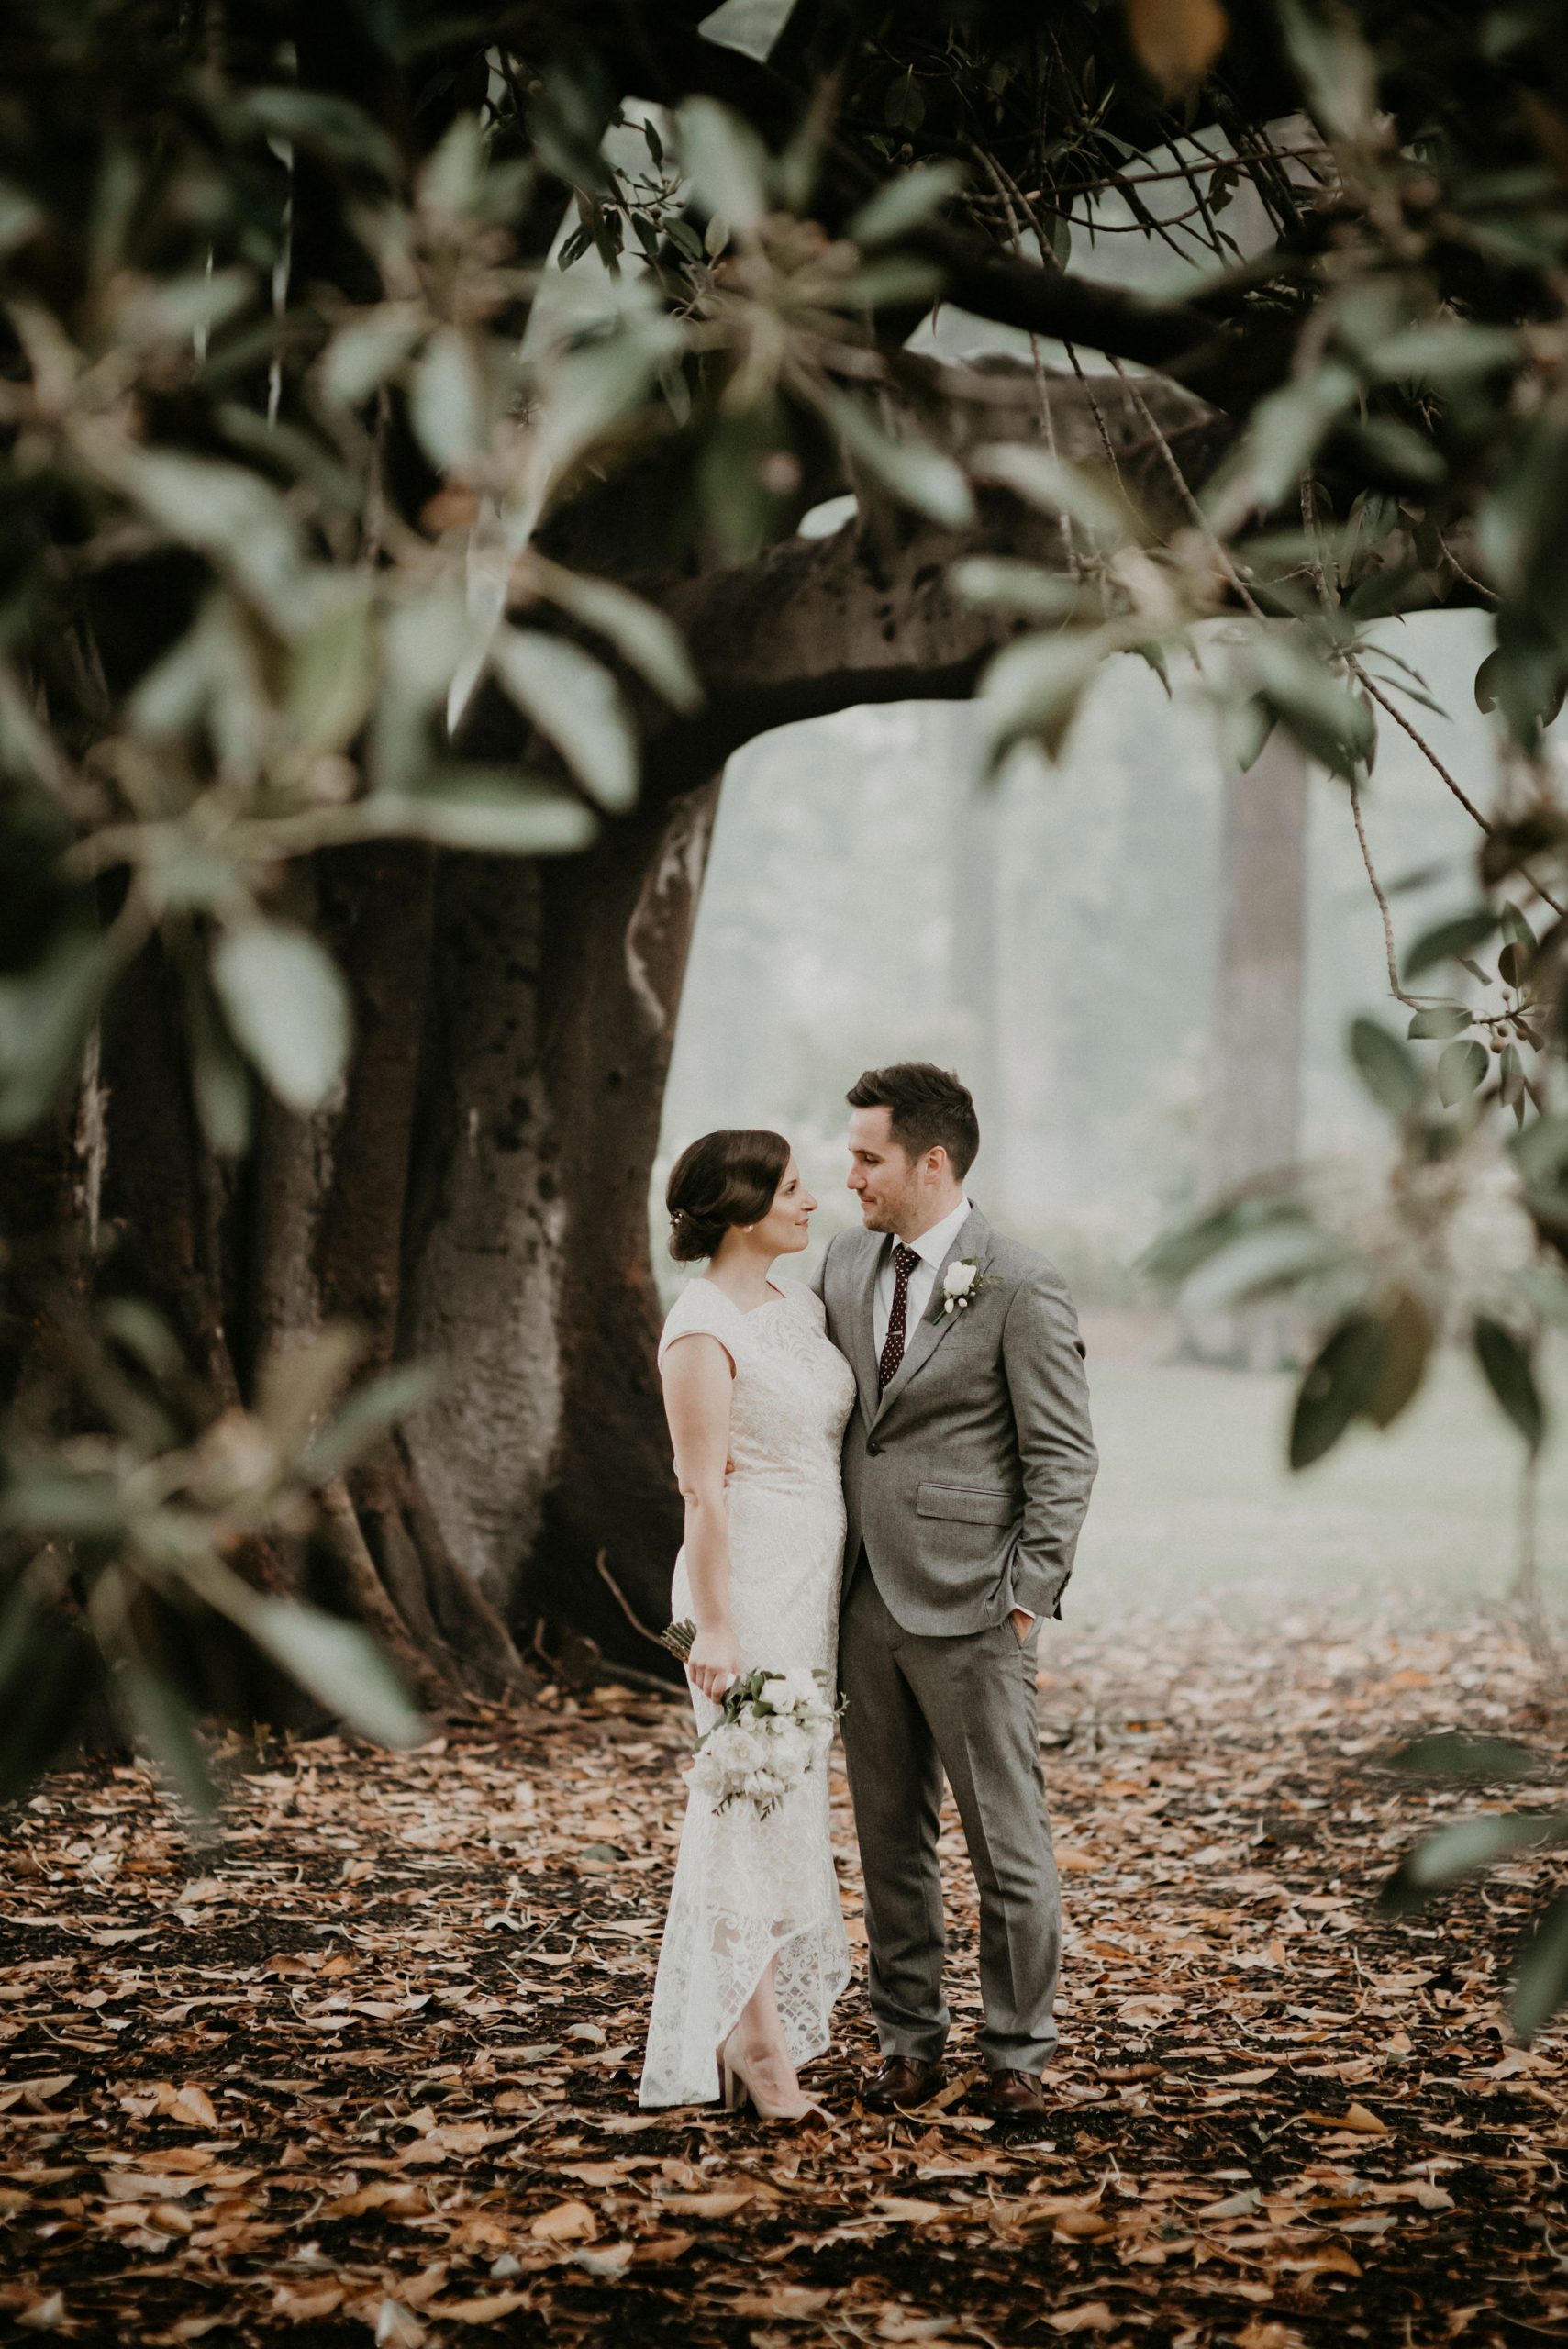 Couple stand in front of fig tree in the rain and fog Let's Elope Melbourne Portfolio Celebrant Photographer Elopement Package Victoria Sarah Matler Photography intimate wedding Fitzroy Gardens Fog Moody East Melbourne